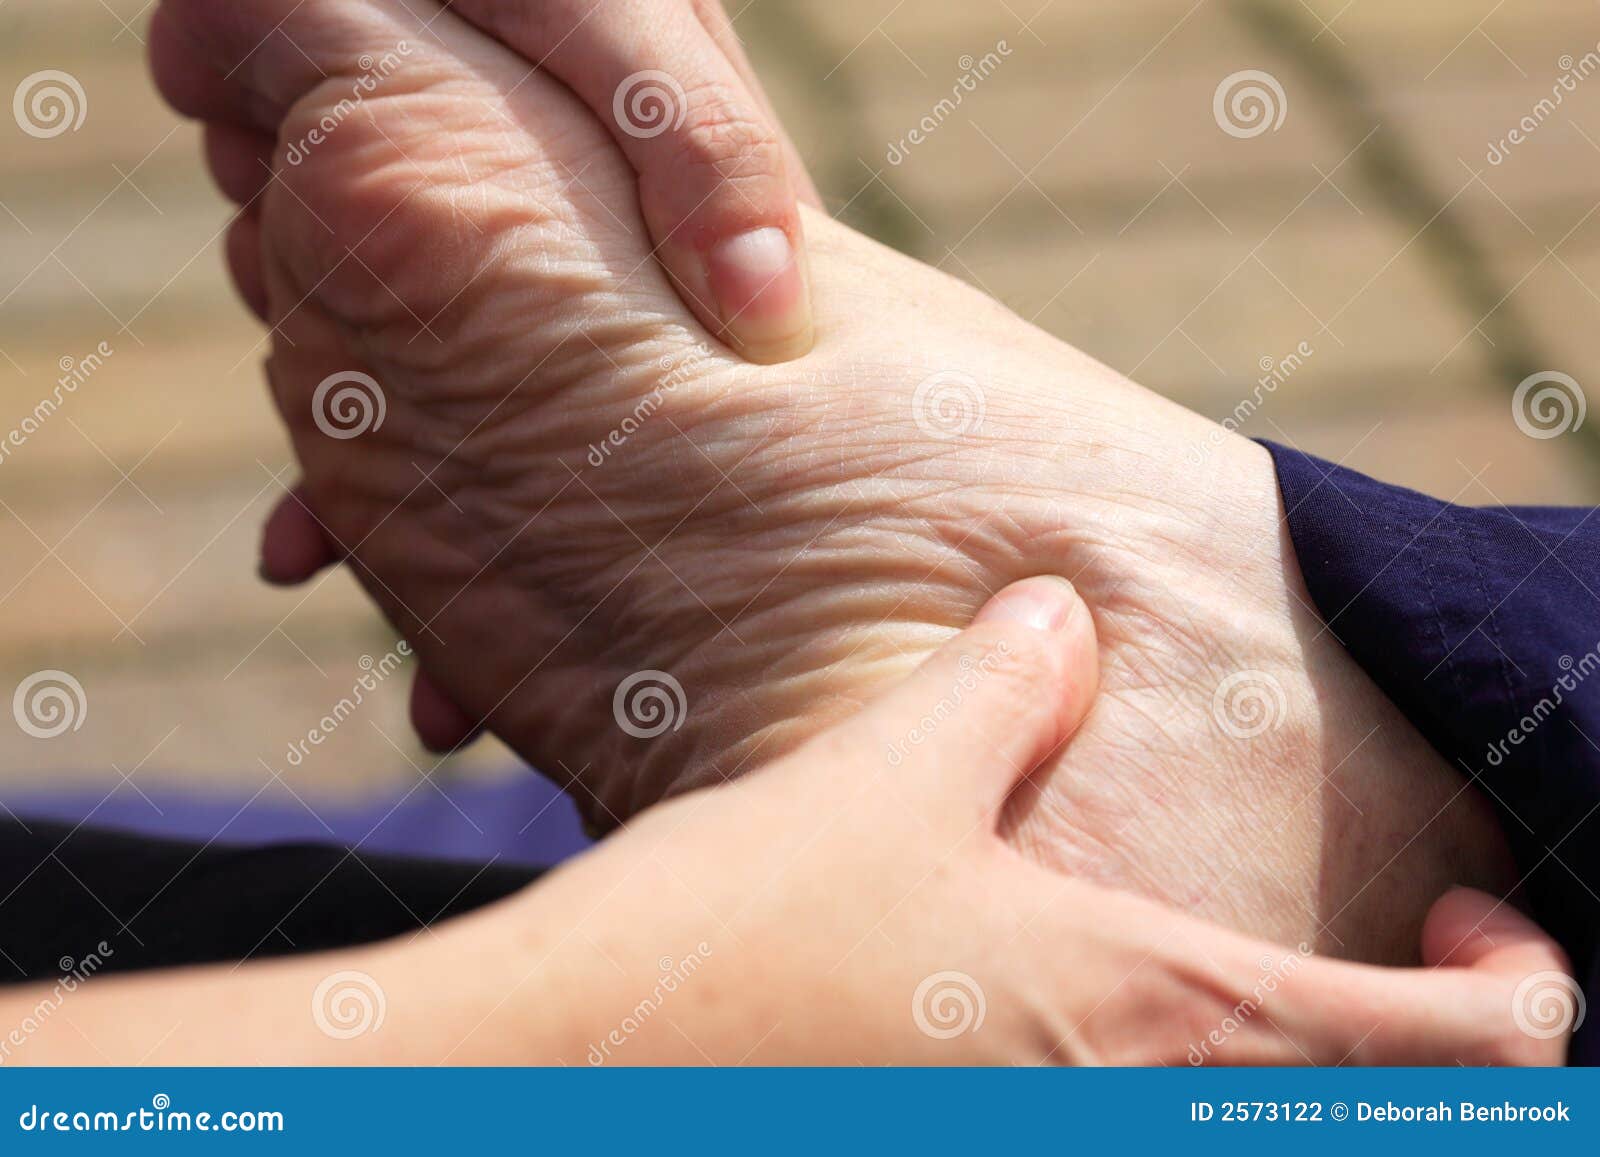 Massage To The Foot Stock Photo Image Of Gentle Energy 2573122